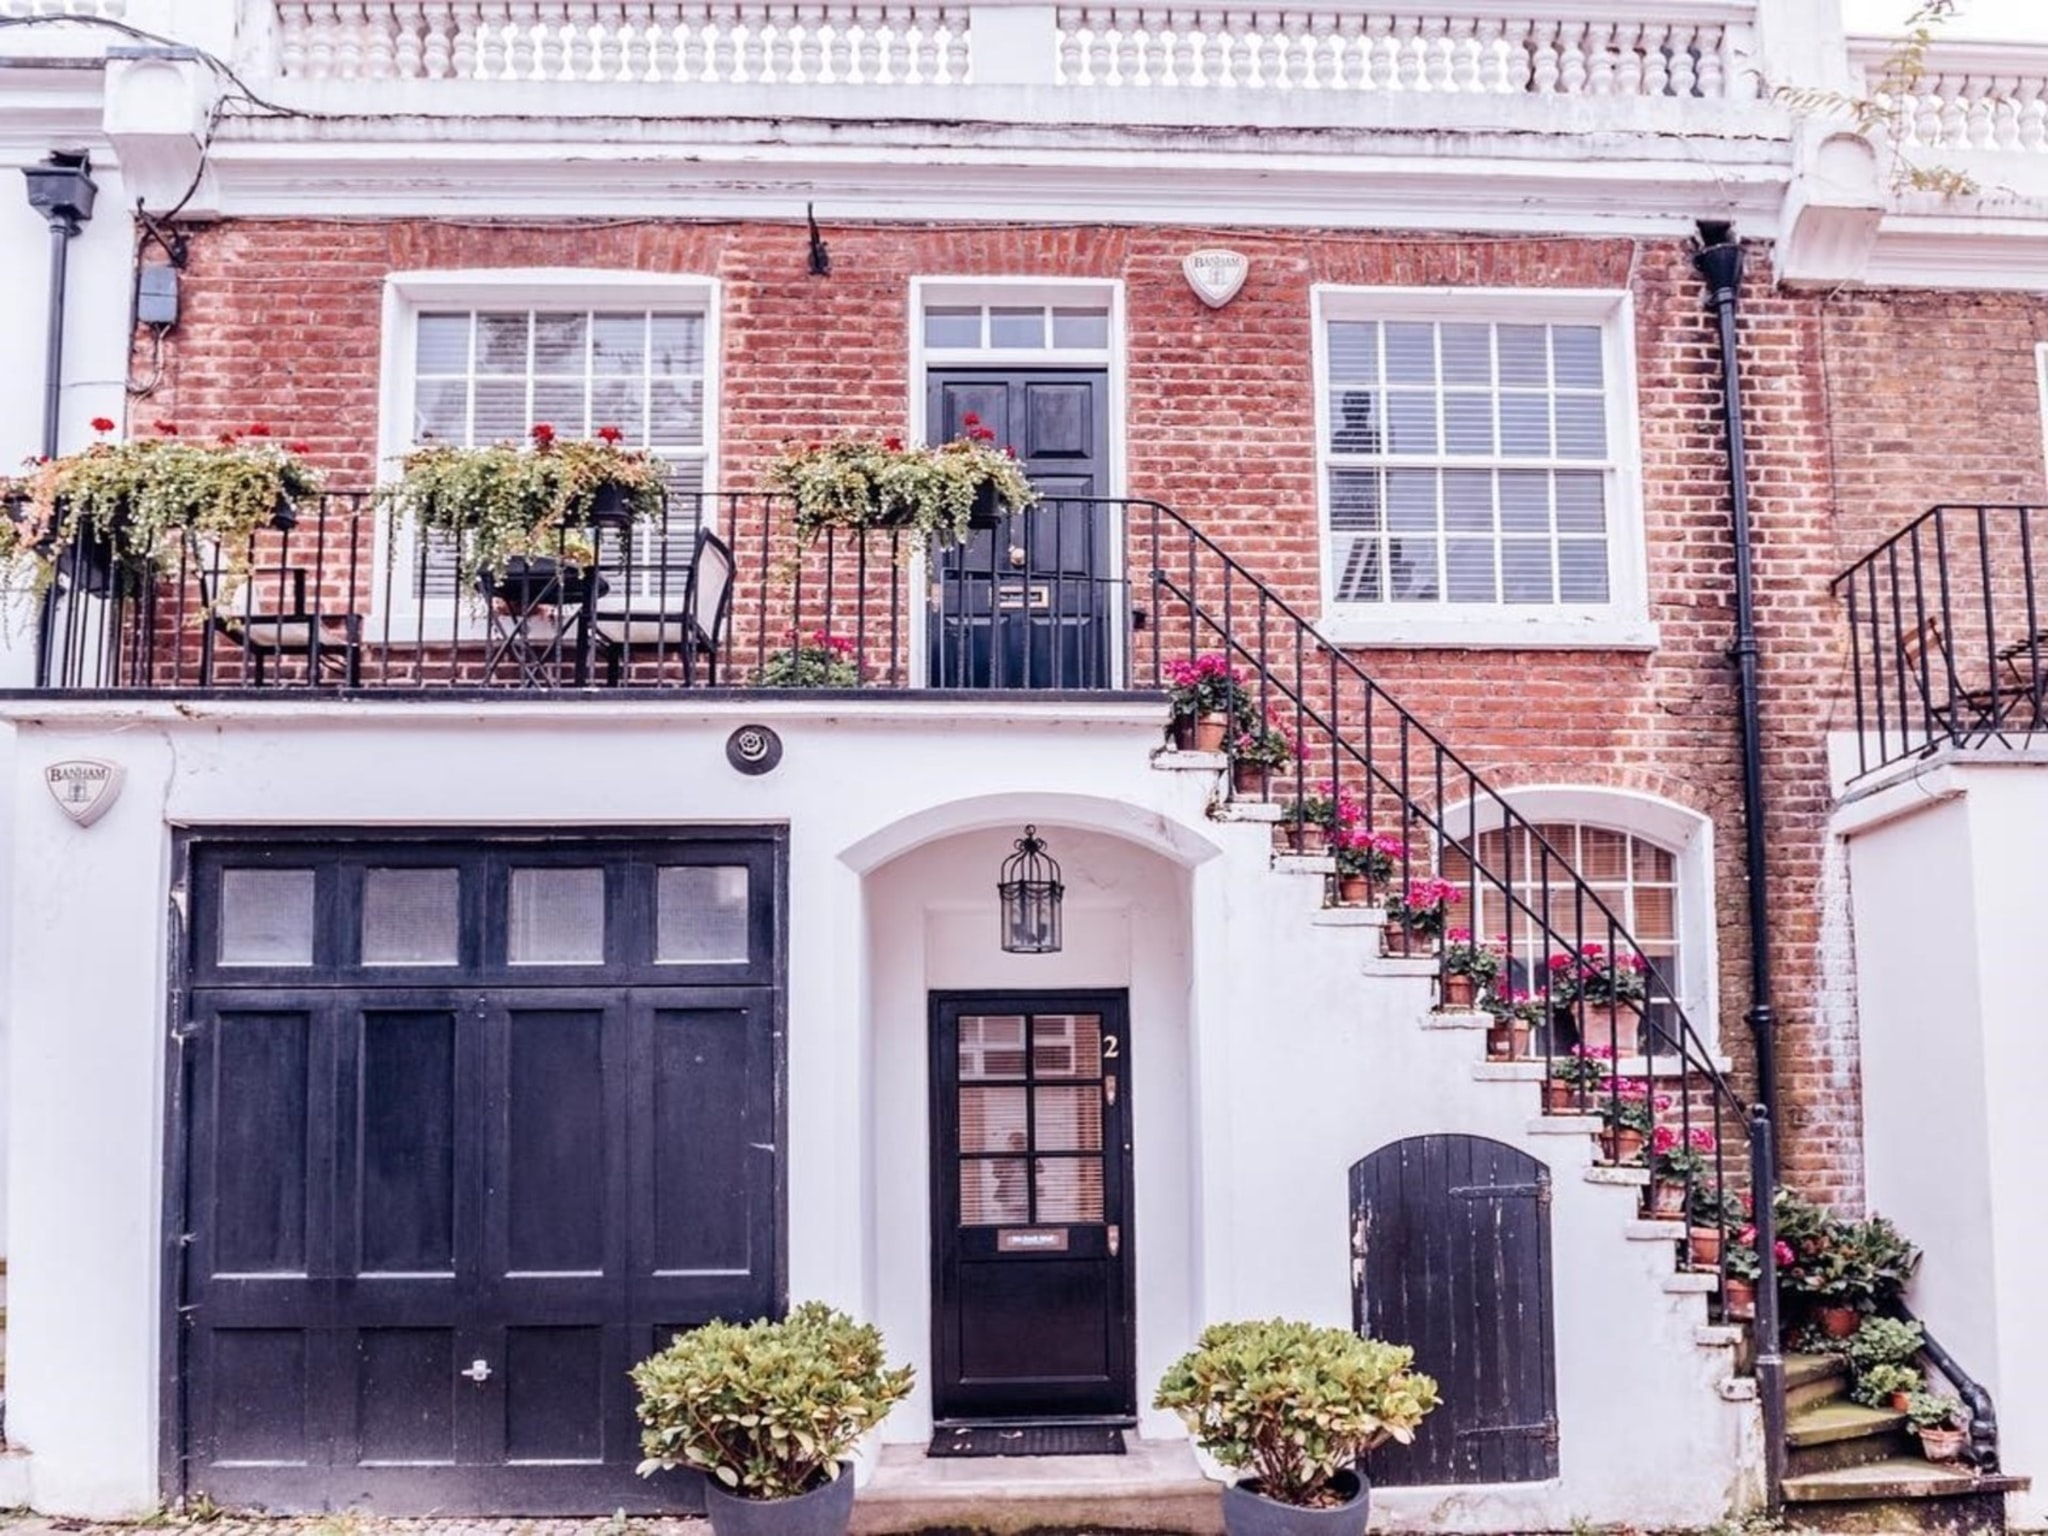 An Estate Agents Guide to Being a Good House Hunter